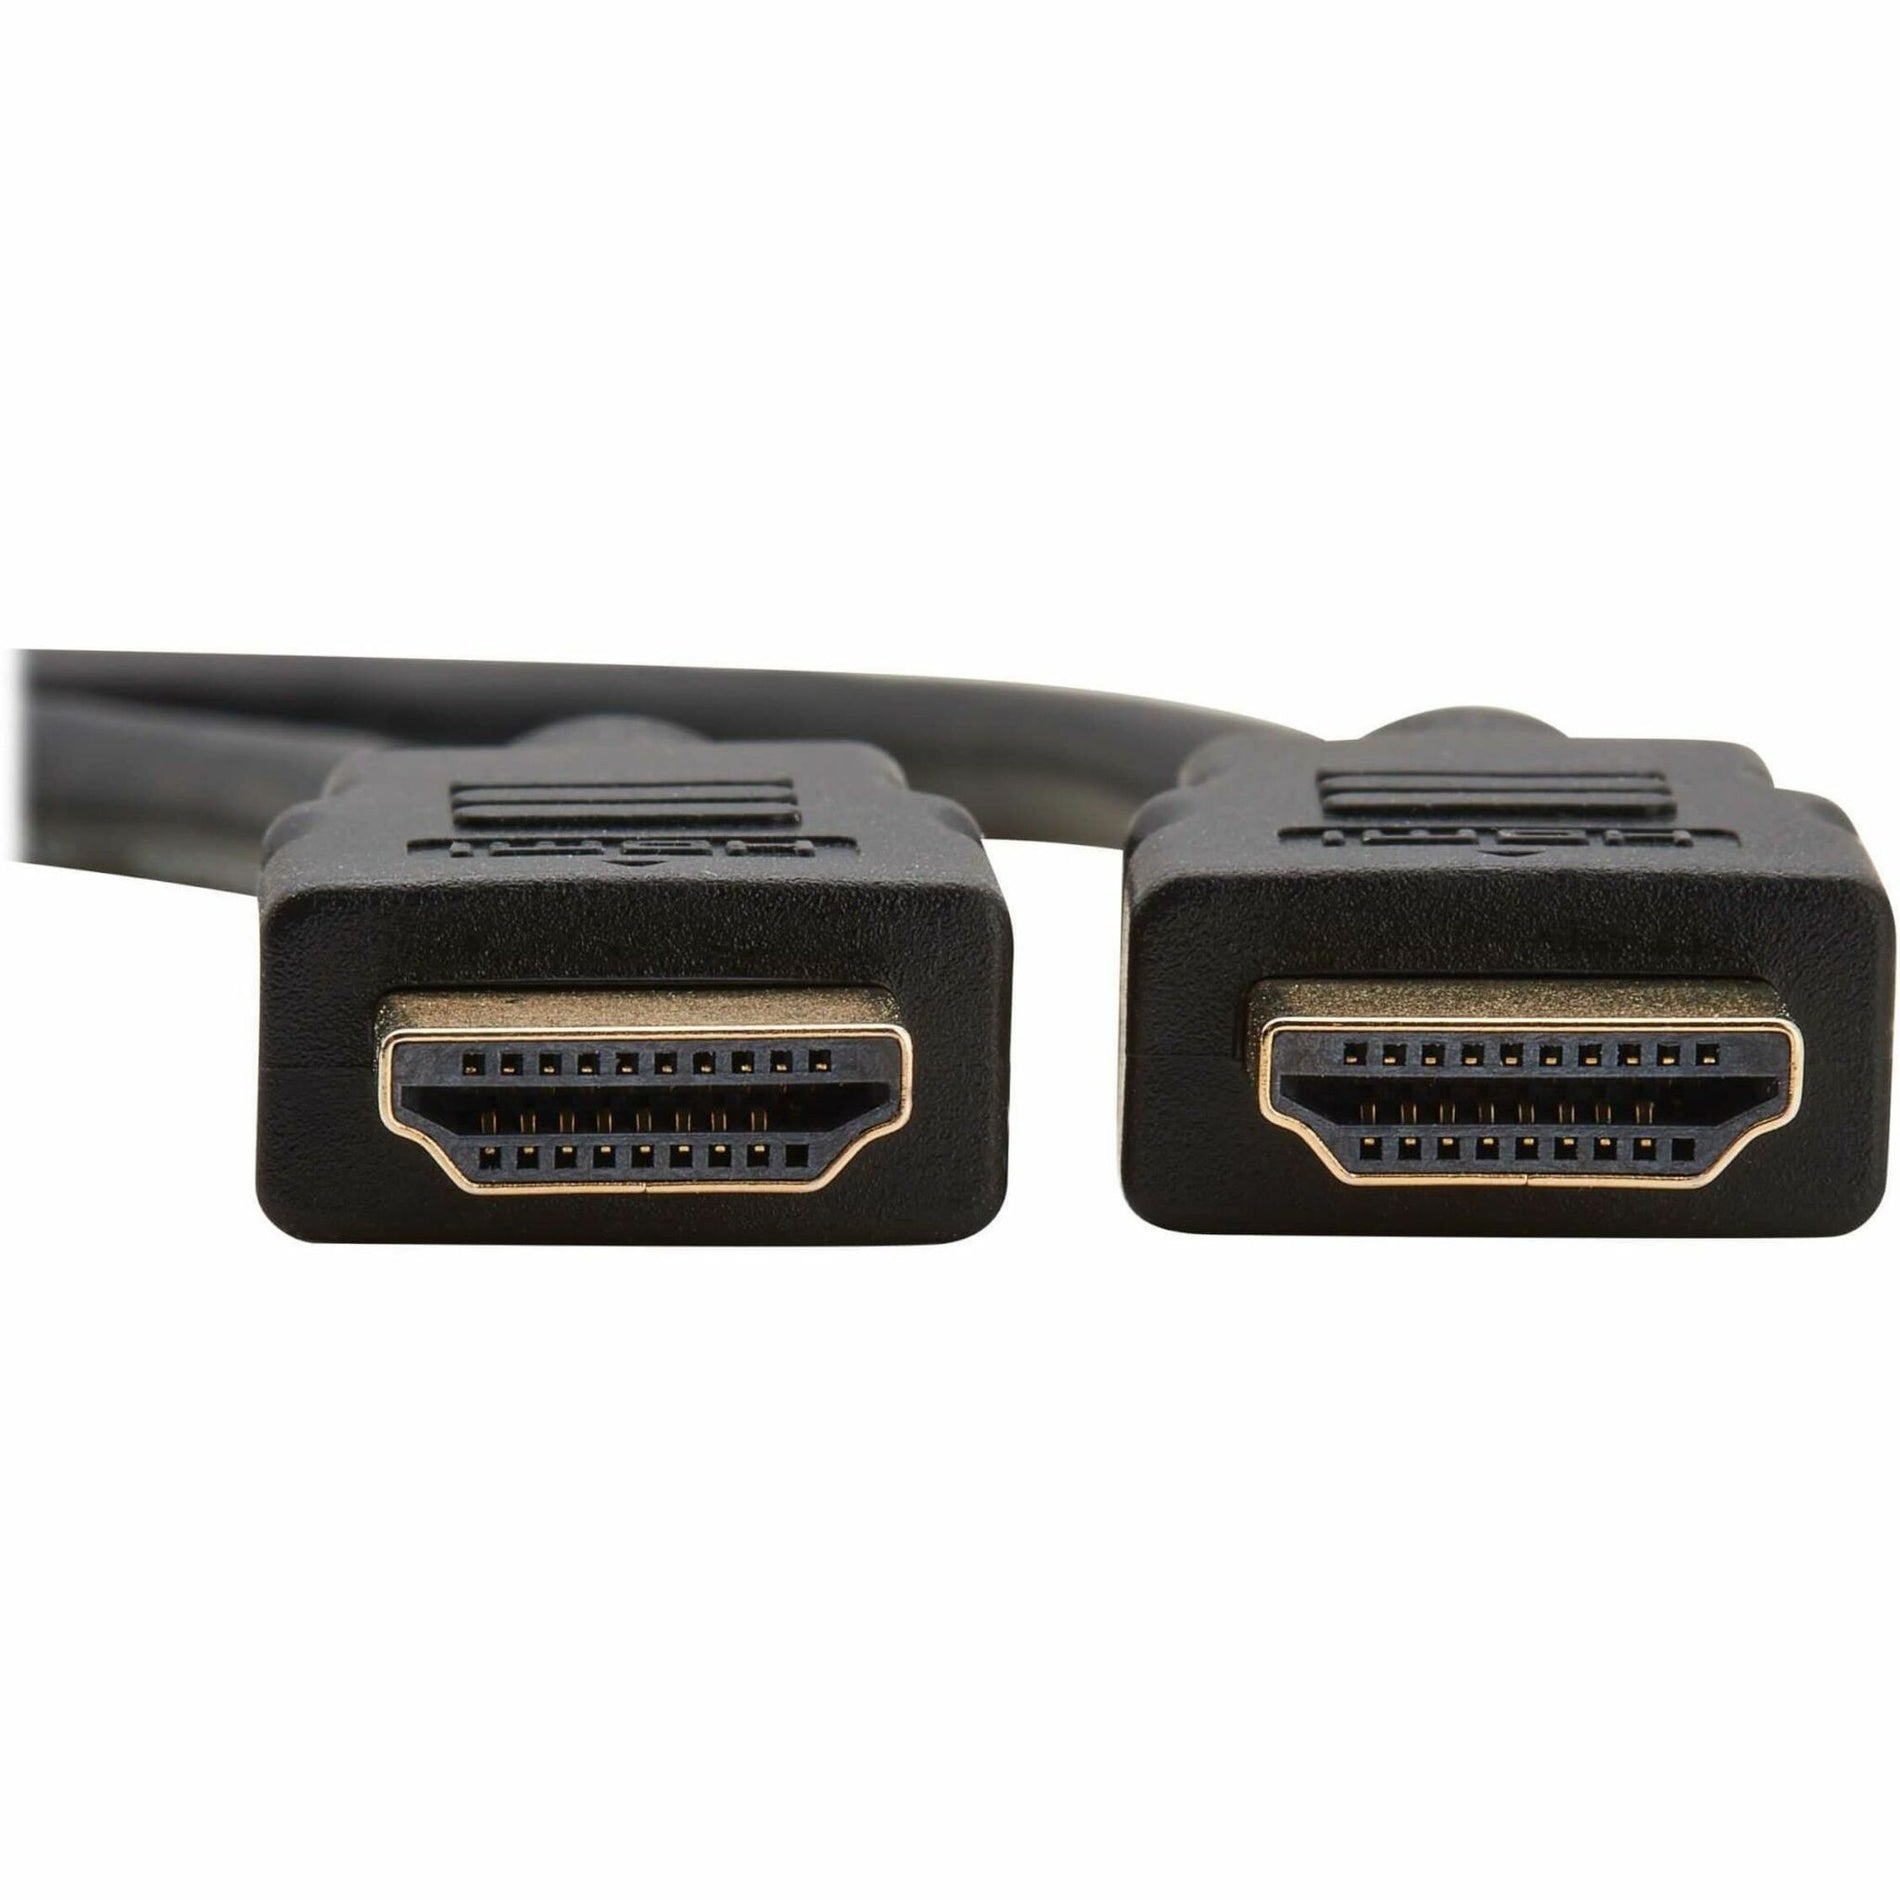 Tripp Lite P568-035 35-ft. High Speed HDMI Gold Cable, 18 Gbit/s Data Transfer Rate, EMI/RF Protection